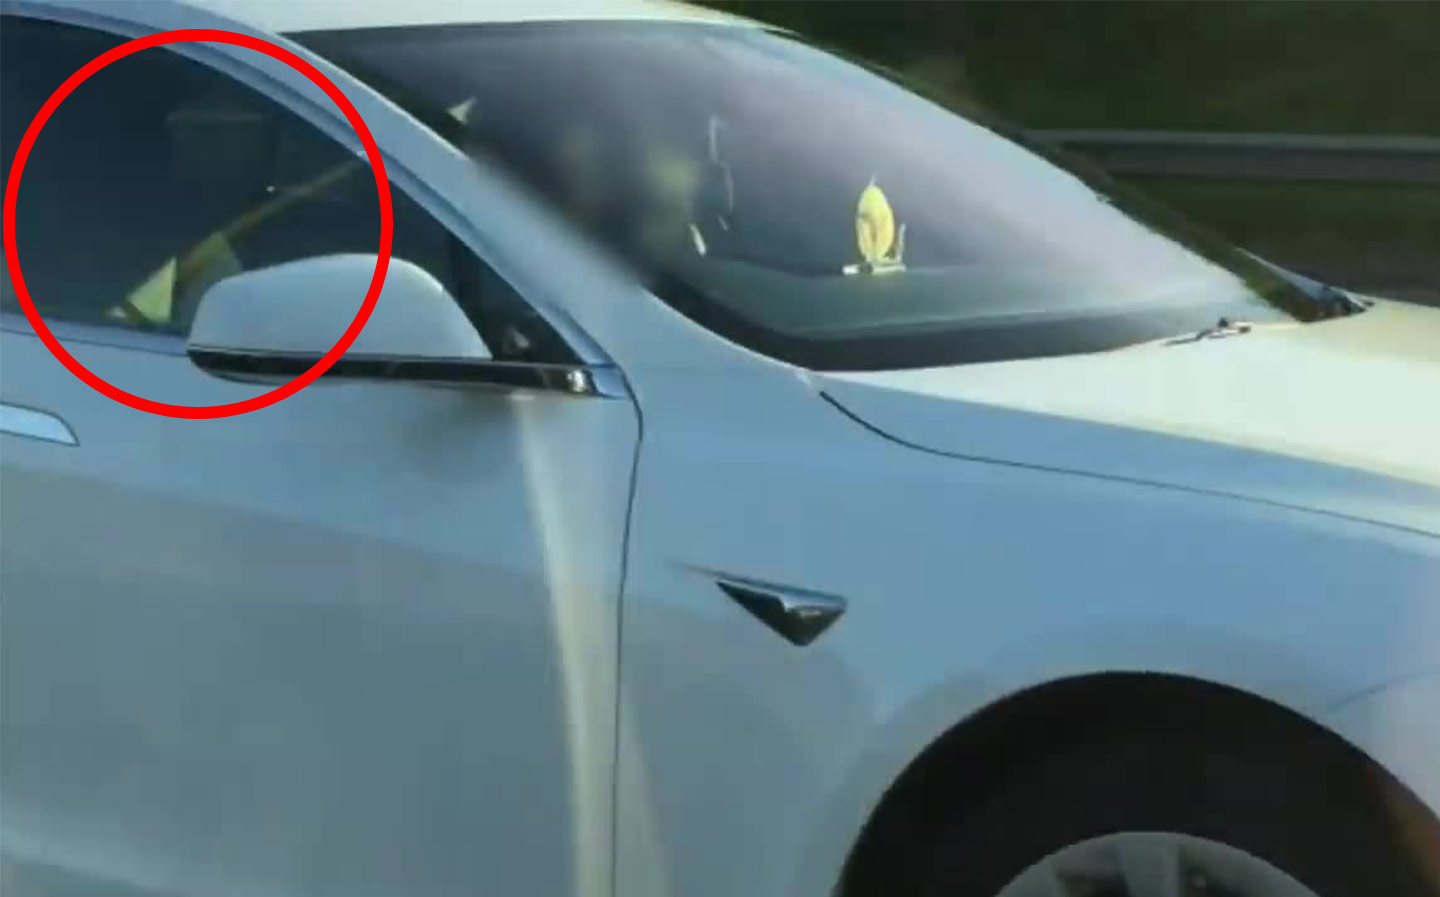 Tesla owner filmed in passenger seat using Autopilot says he was "unlucky one who got caught"